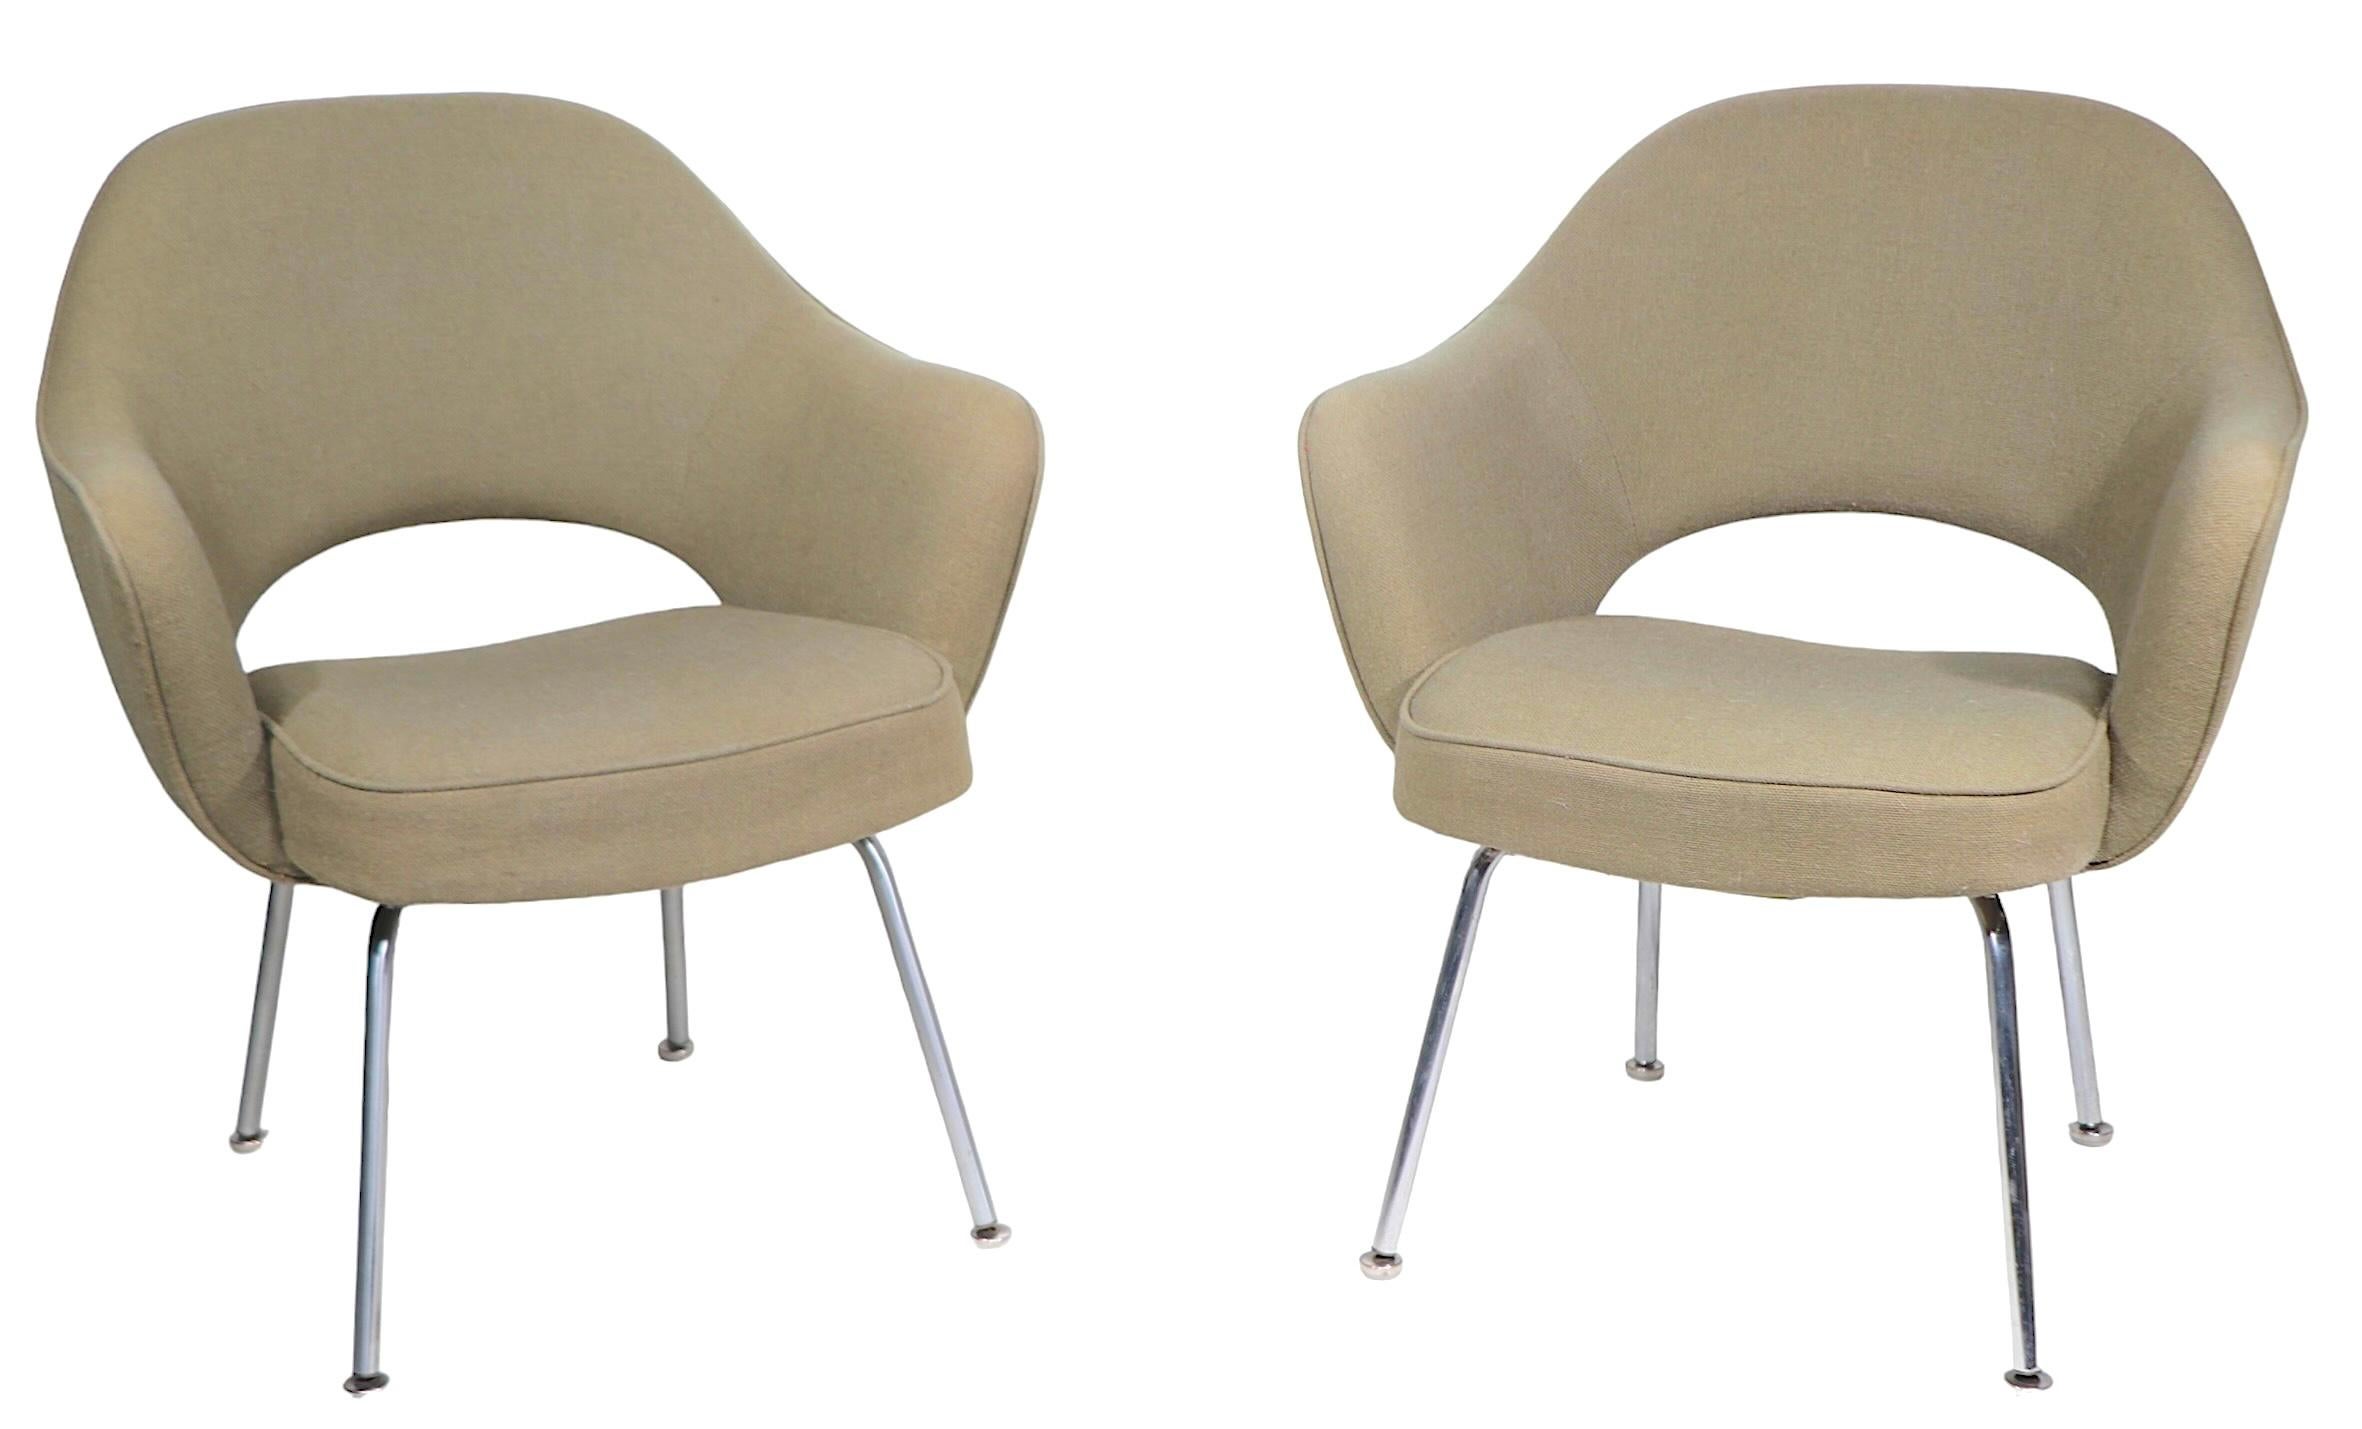  Pair of iconic Mid Century architectural design, from recognized master of the genre, Eero Saarinen. The Executive Arm Chair is considered to be one of the most important pieces to come from the golden age of Mid Century design in America, these